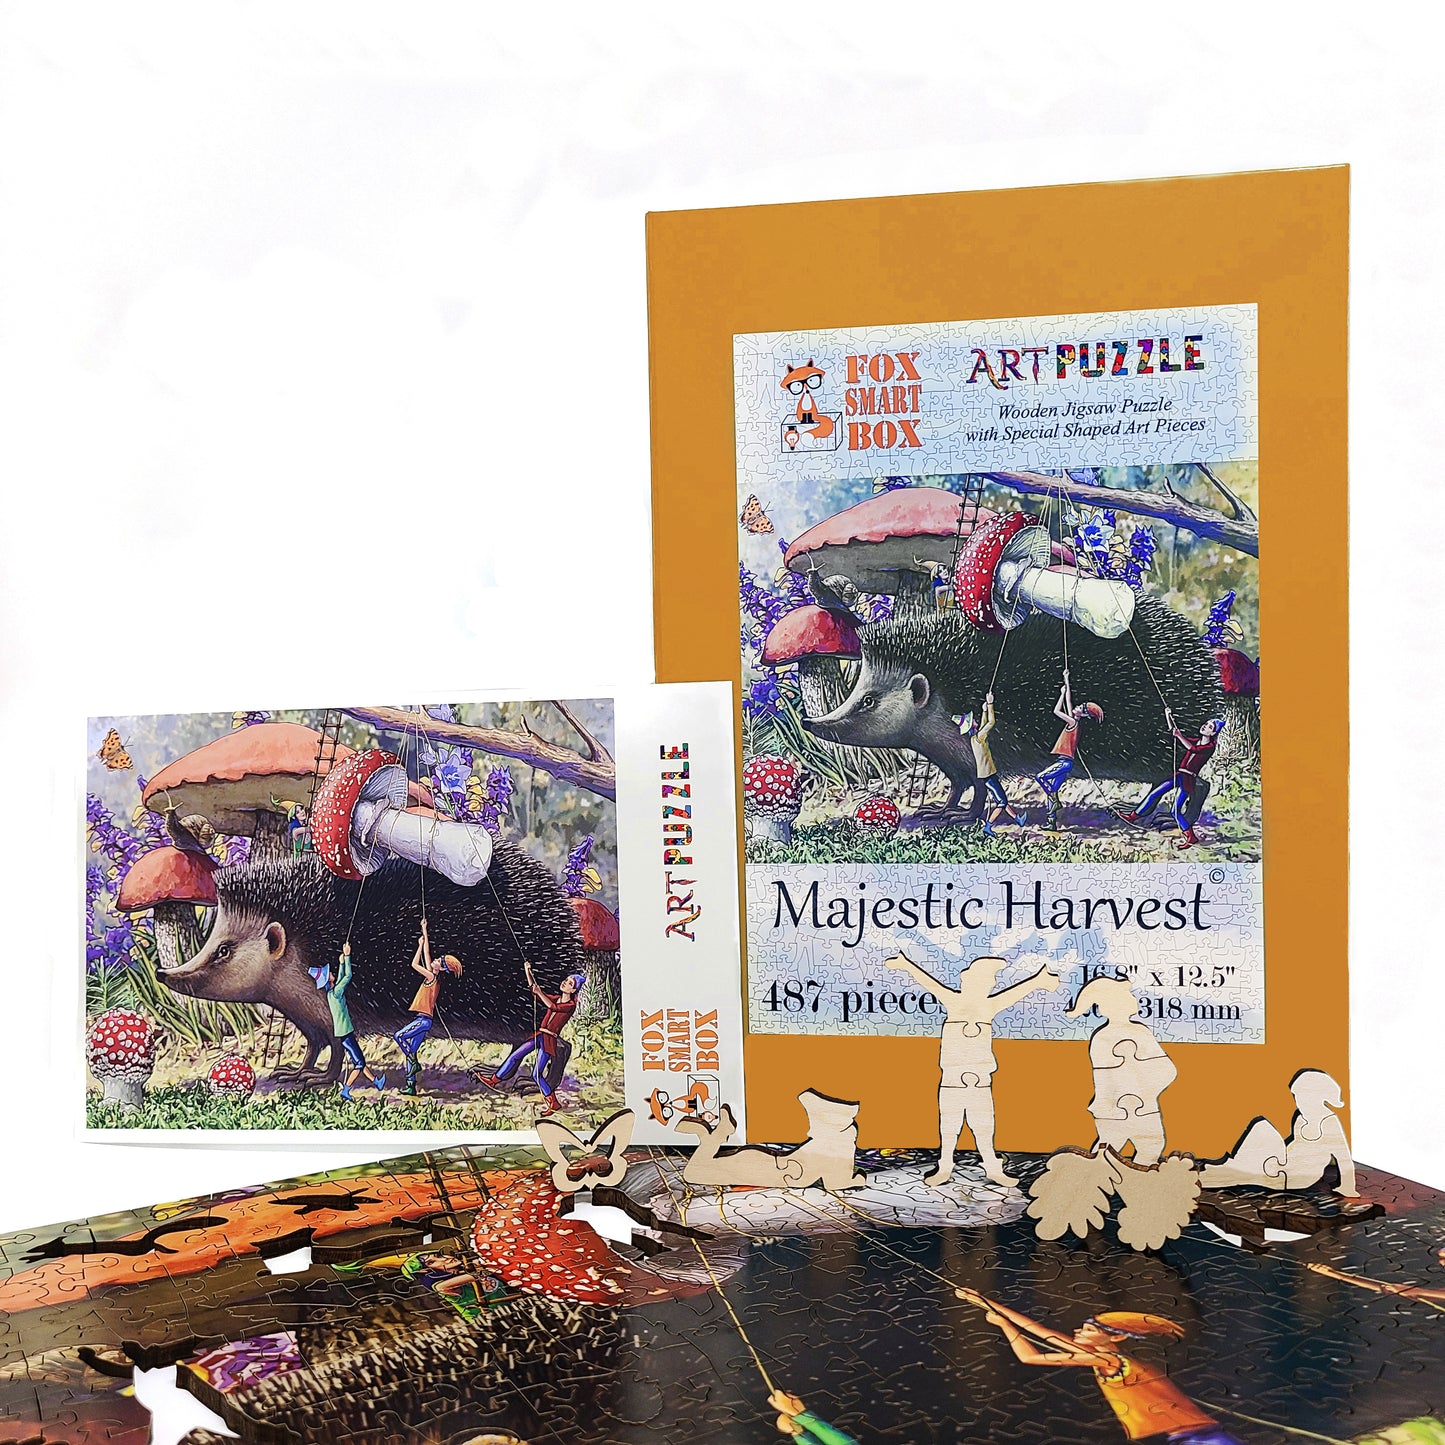 Wooden Jigsaw Puzzle with Uniquely Shaped Pieces for Adults - 487 Pieces - Majestic Harvest